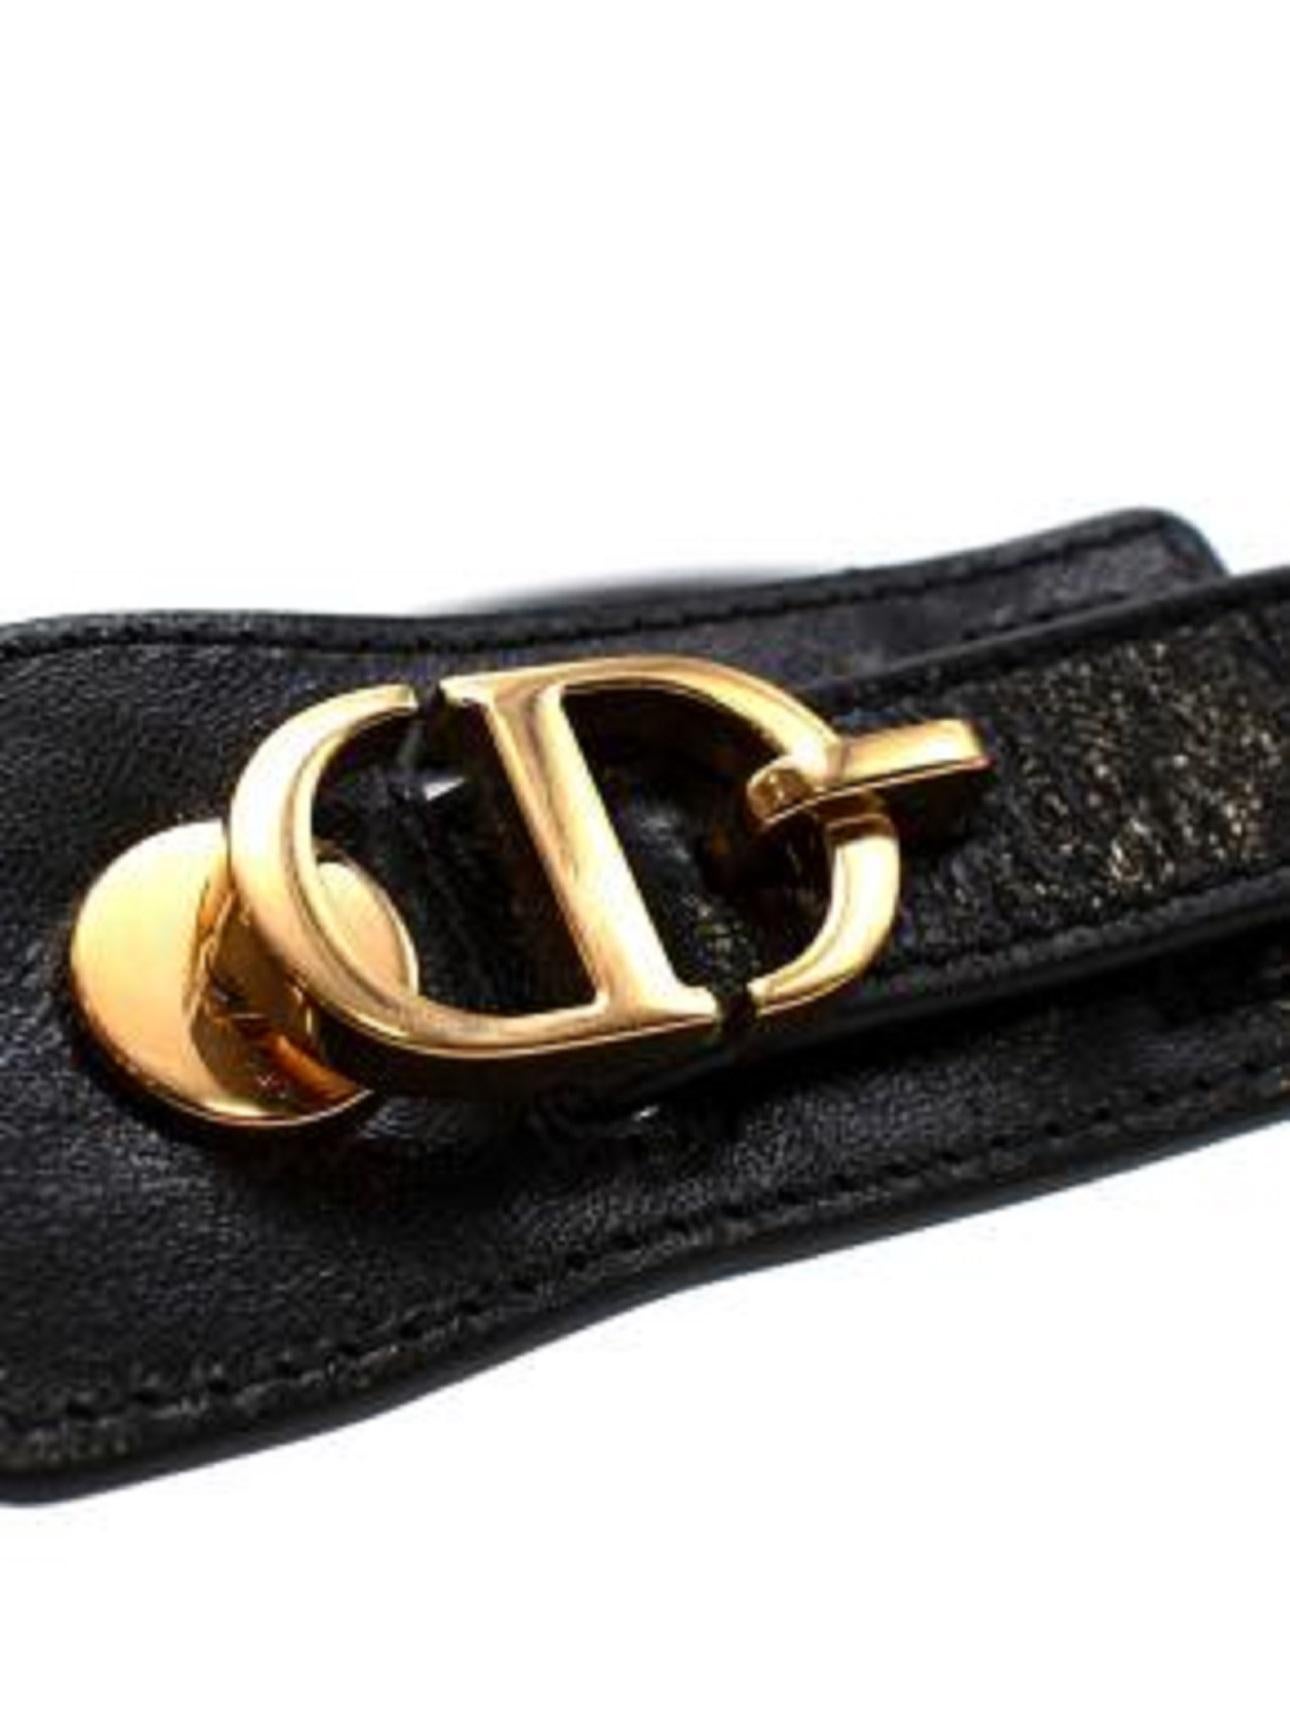 Dior Black Leather Montaigne Belt - Size 70 In Good Condition For Sale In London, GB